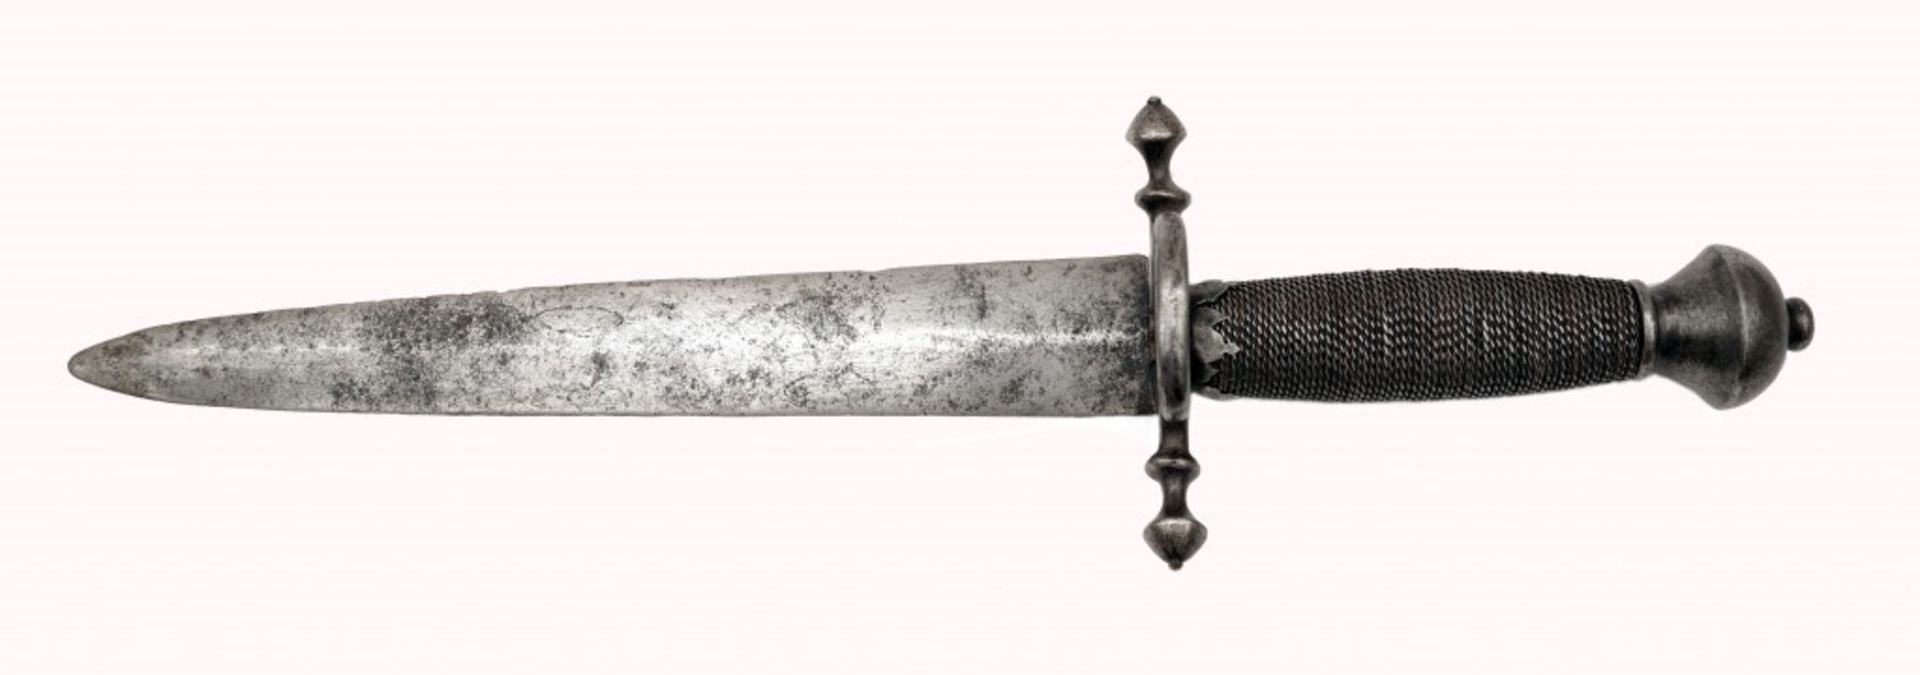 A Left-handed Dagger in Style of the 17th century